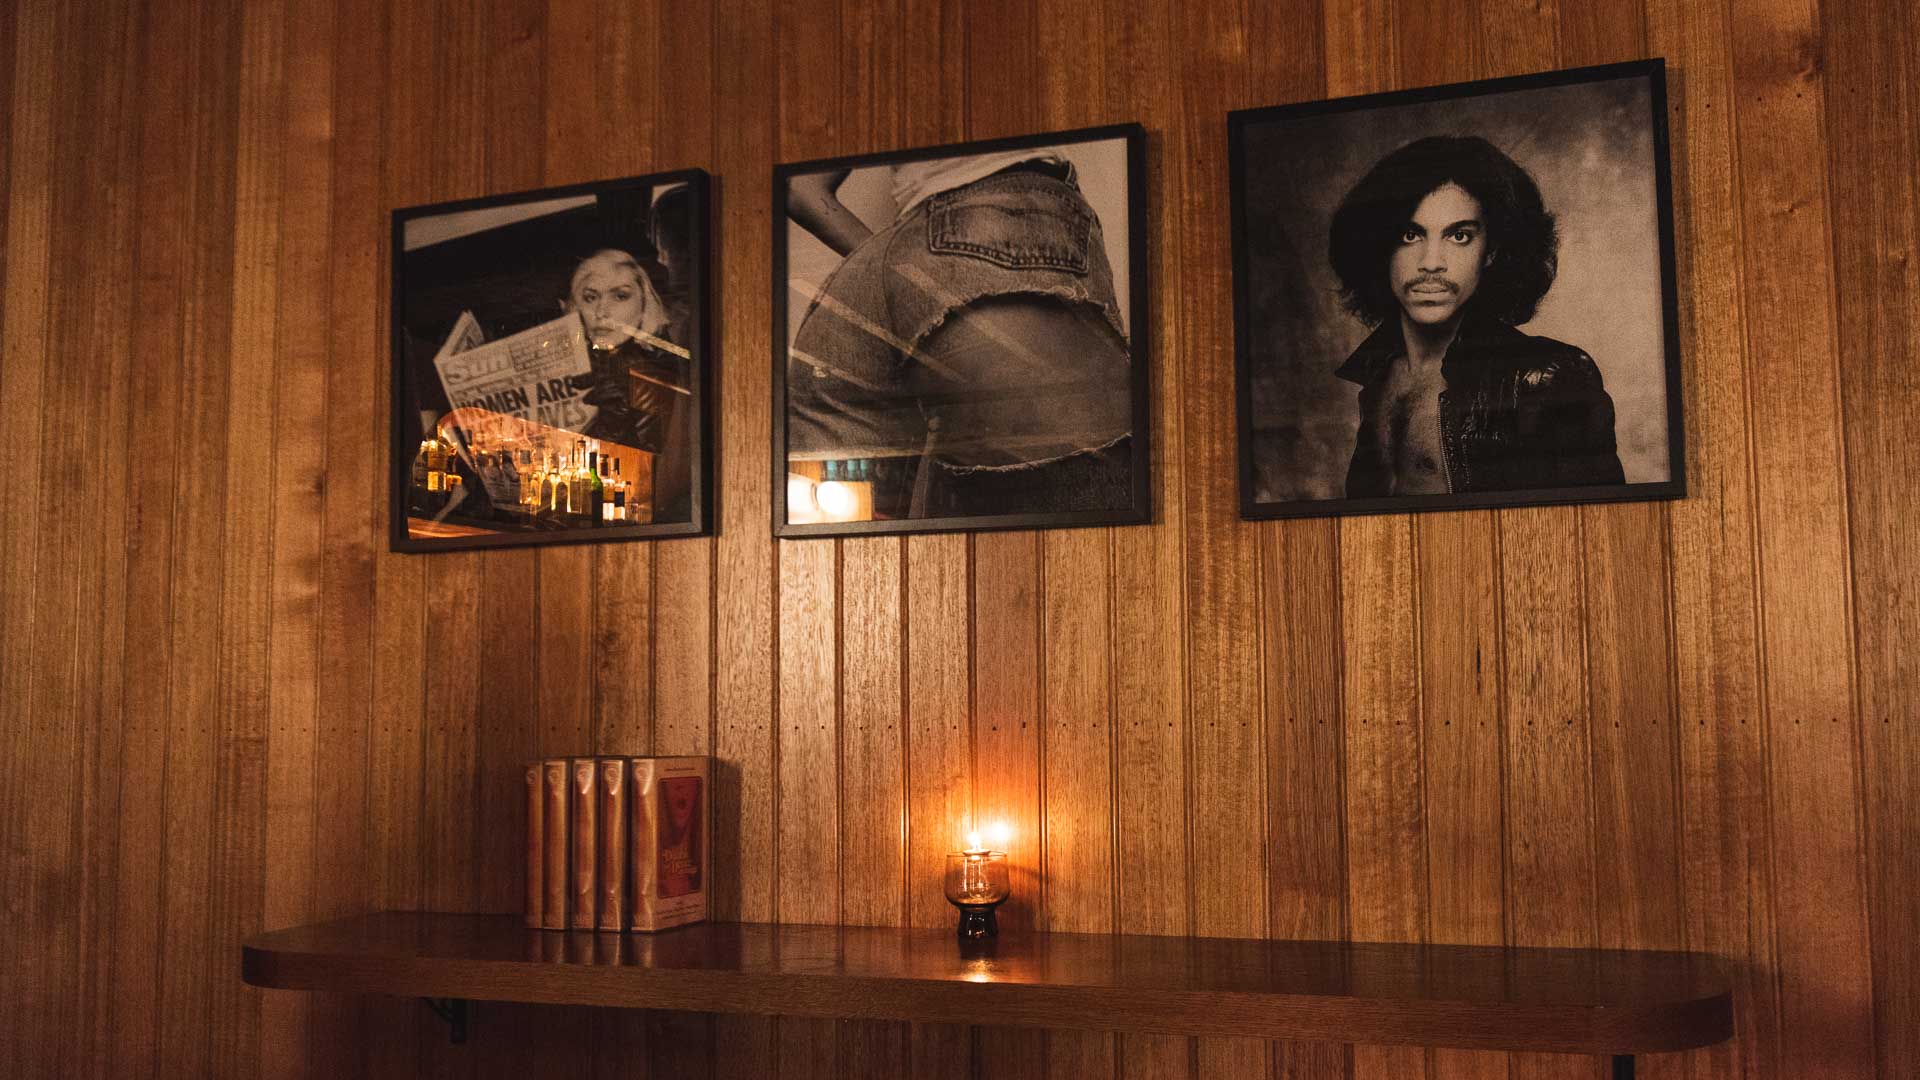 Double Deuce Lounge Is the New '70s Porn Chic' Underground Bar by the Ramblin' Rascal Crew